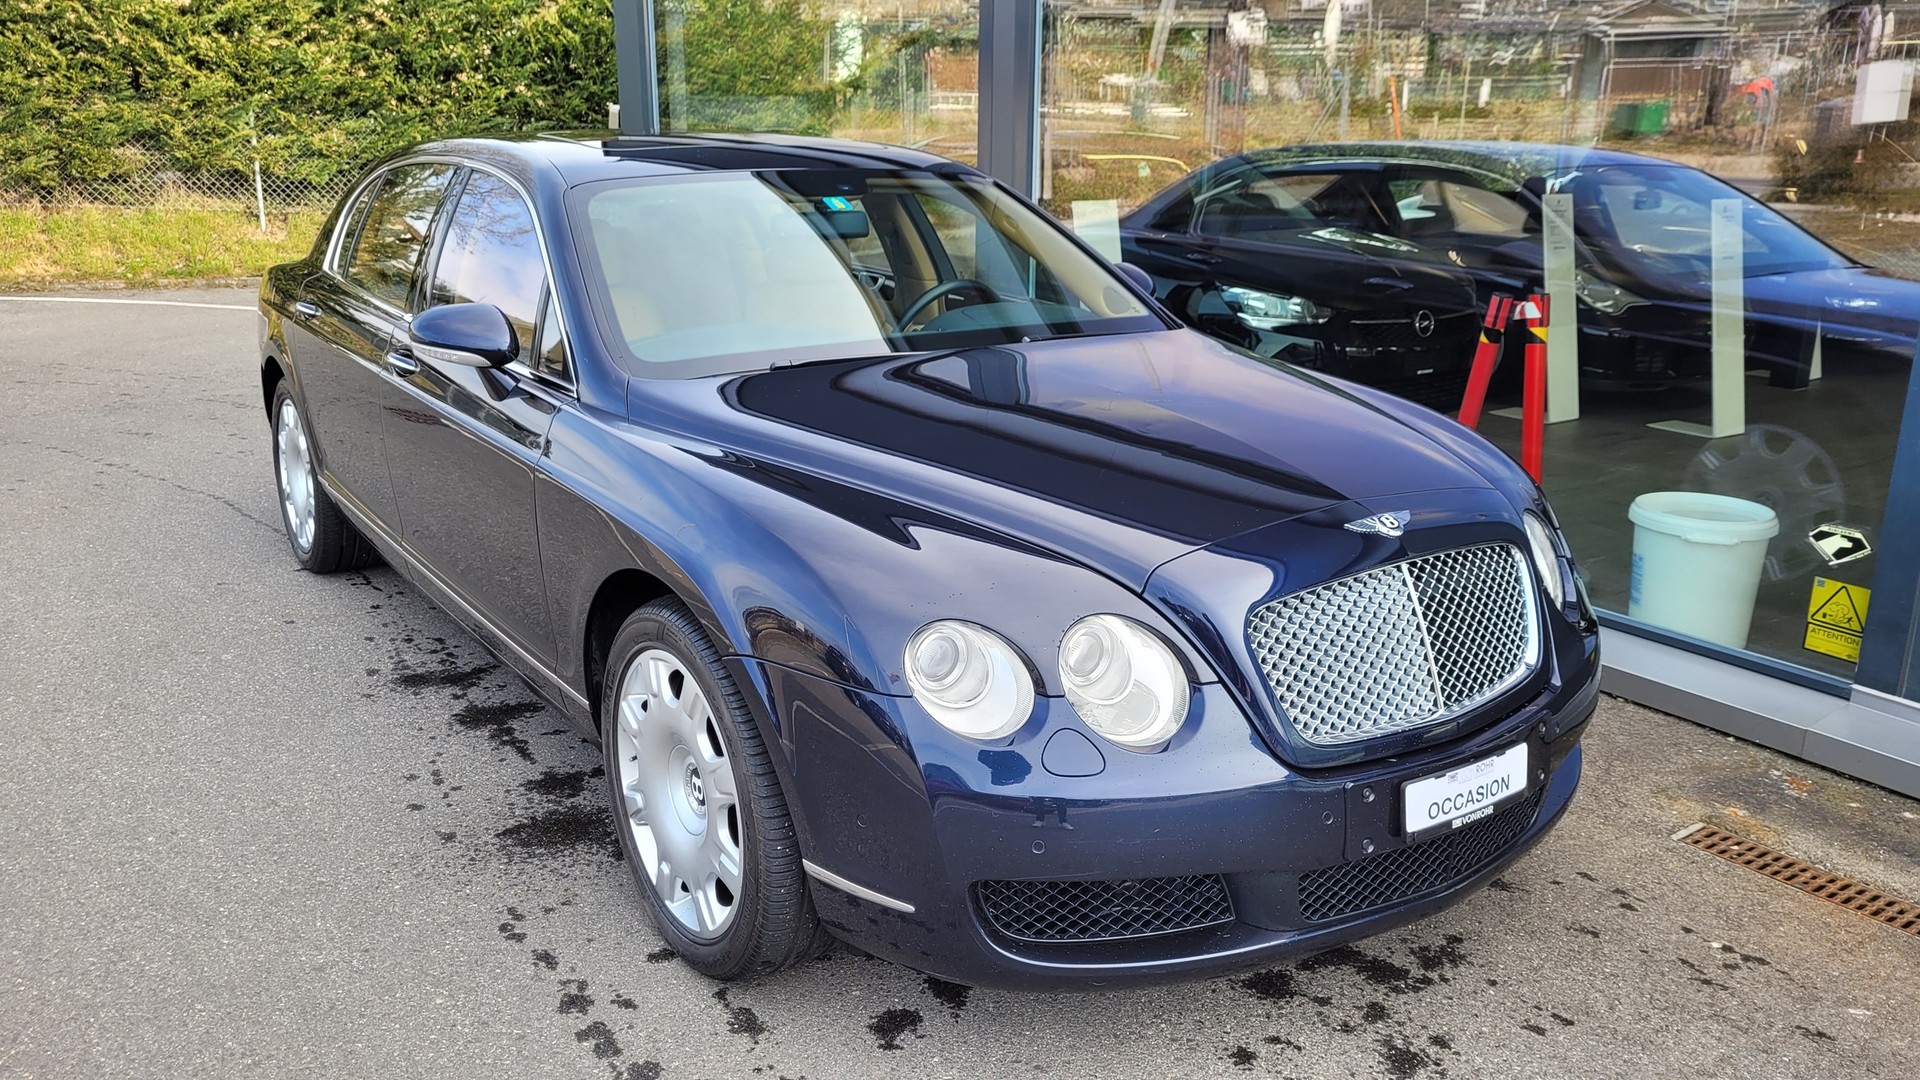 BENTLEY Continental Flying Spur 6.0